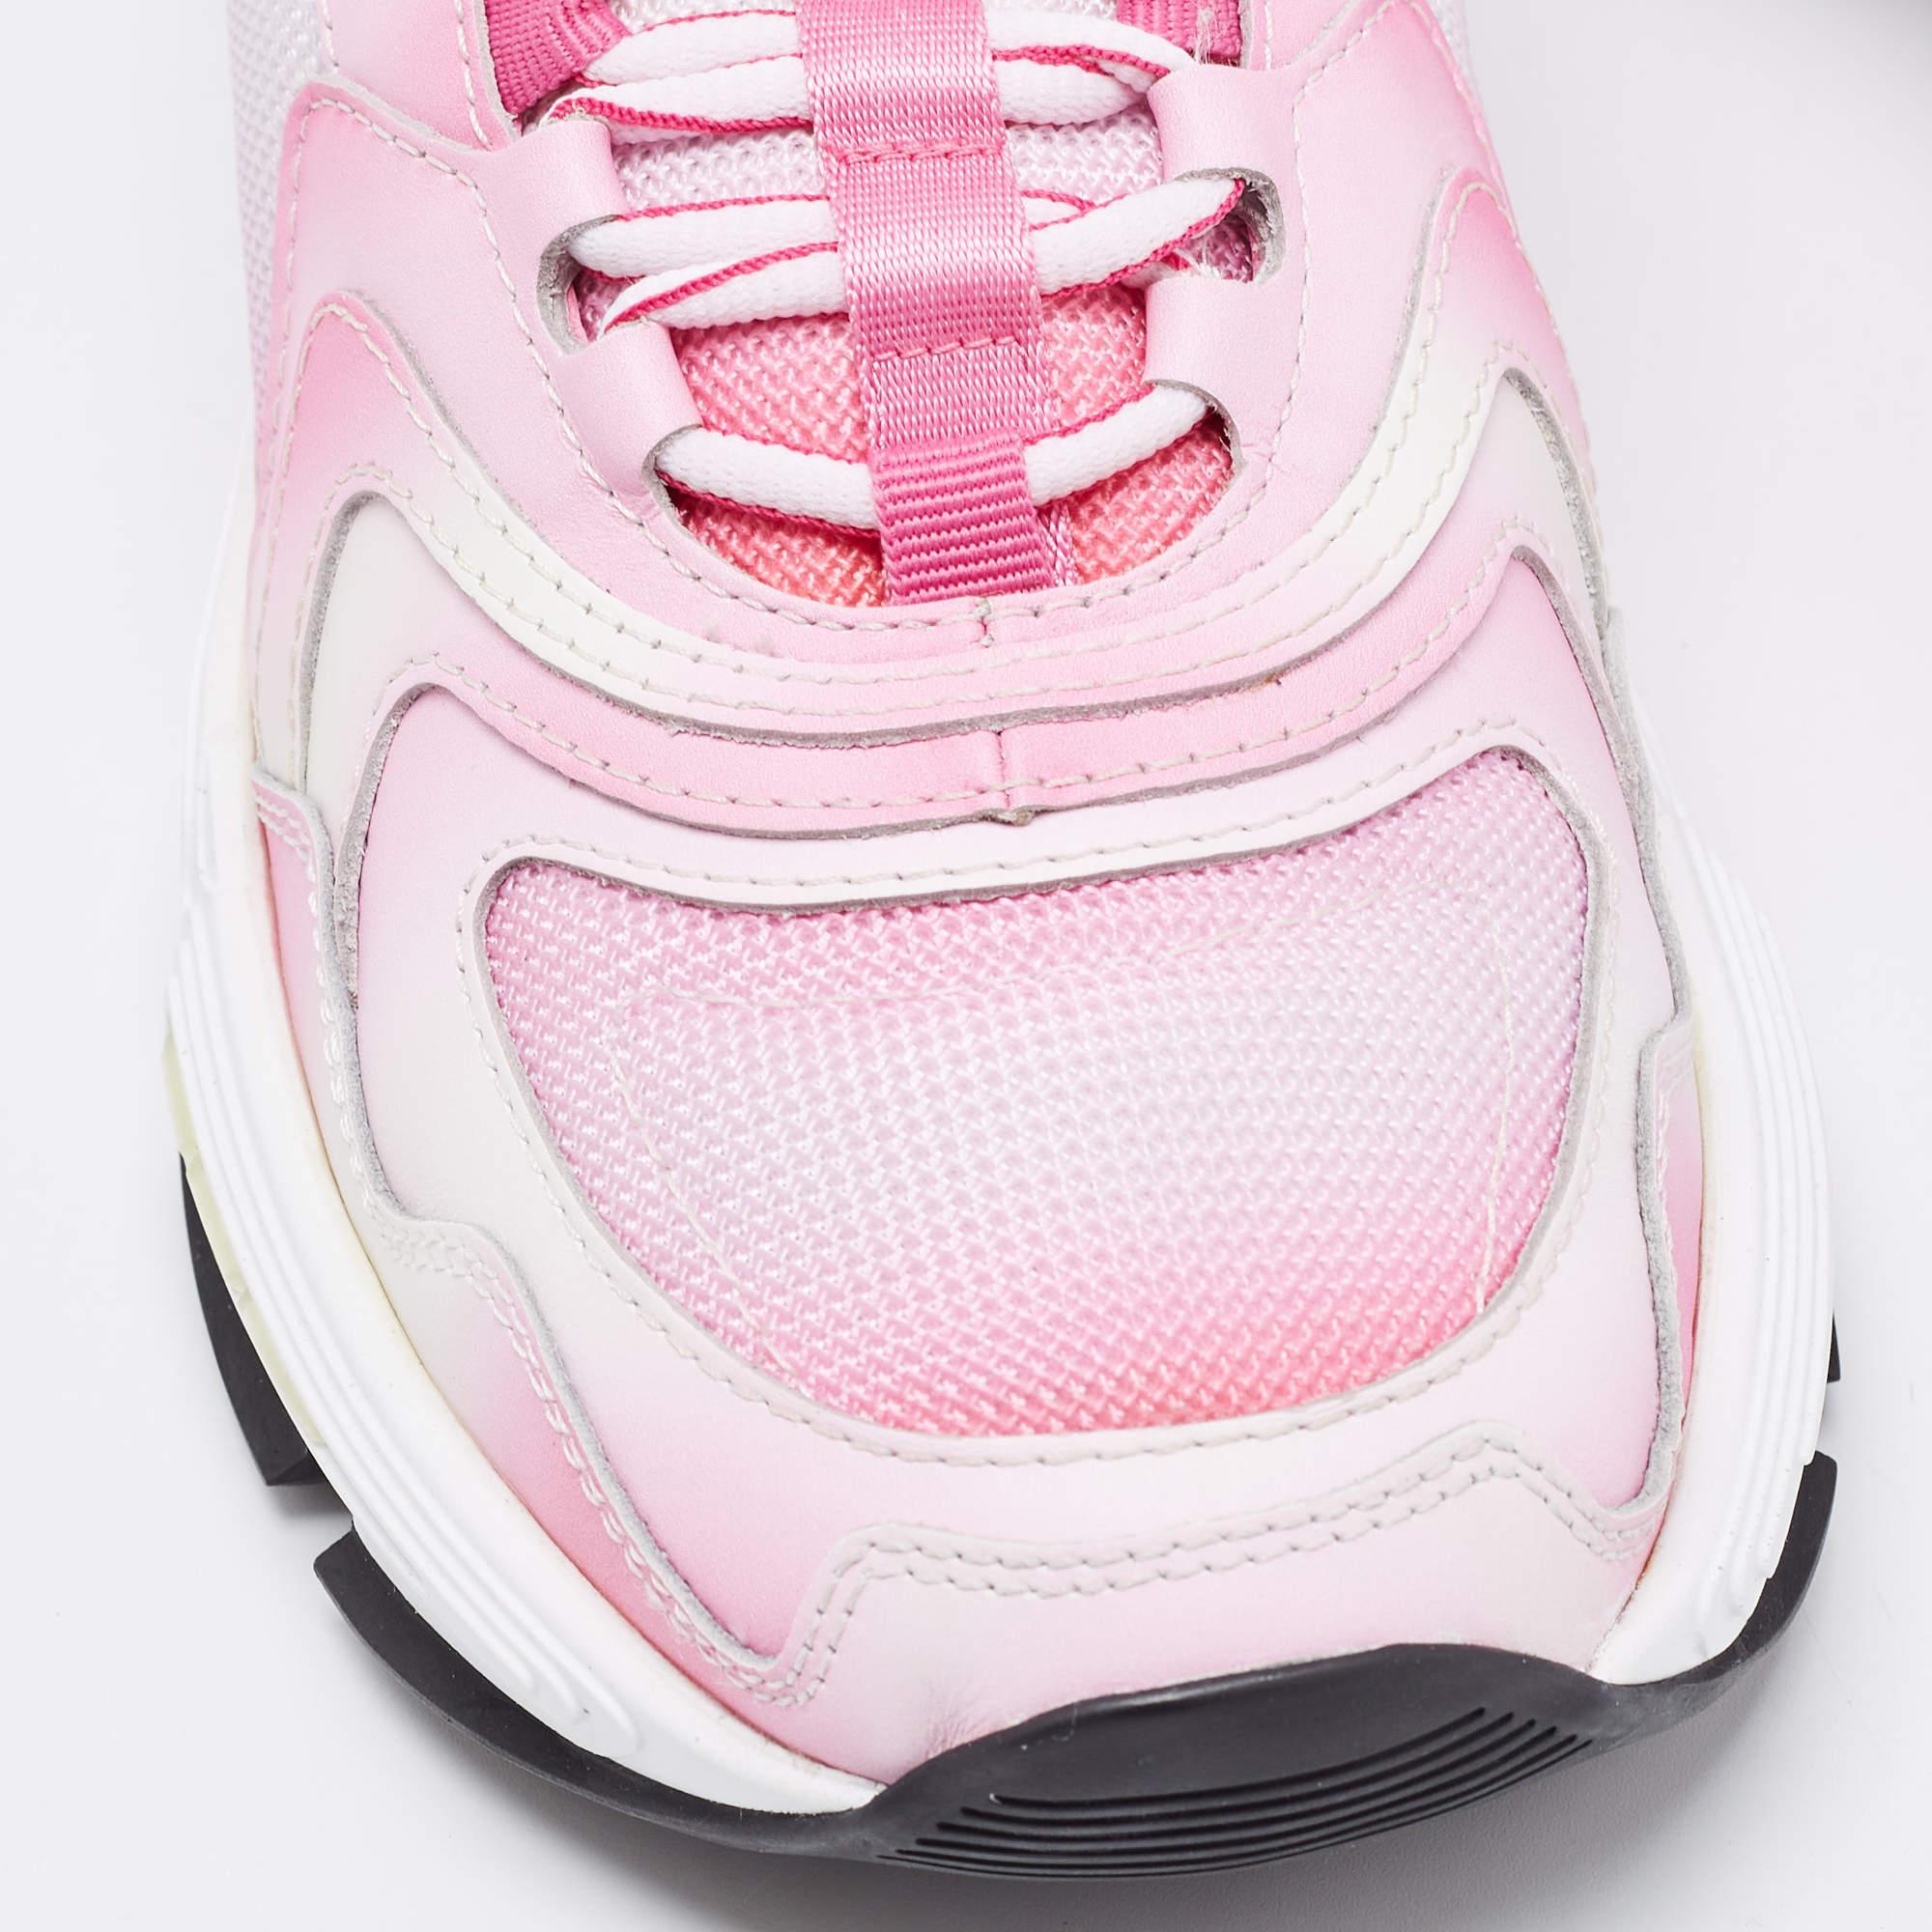 Dior Pink/White Mesh and Leather CD1 Gradient Sneakers Size 41 In Excellent Condition For Sale In Dubai, Al Qouz 2